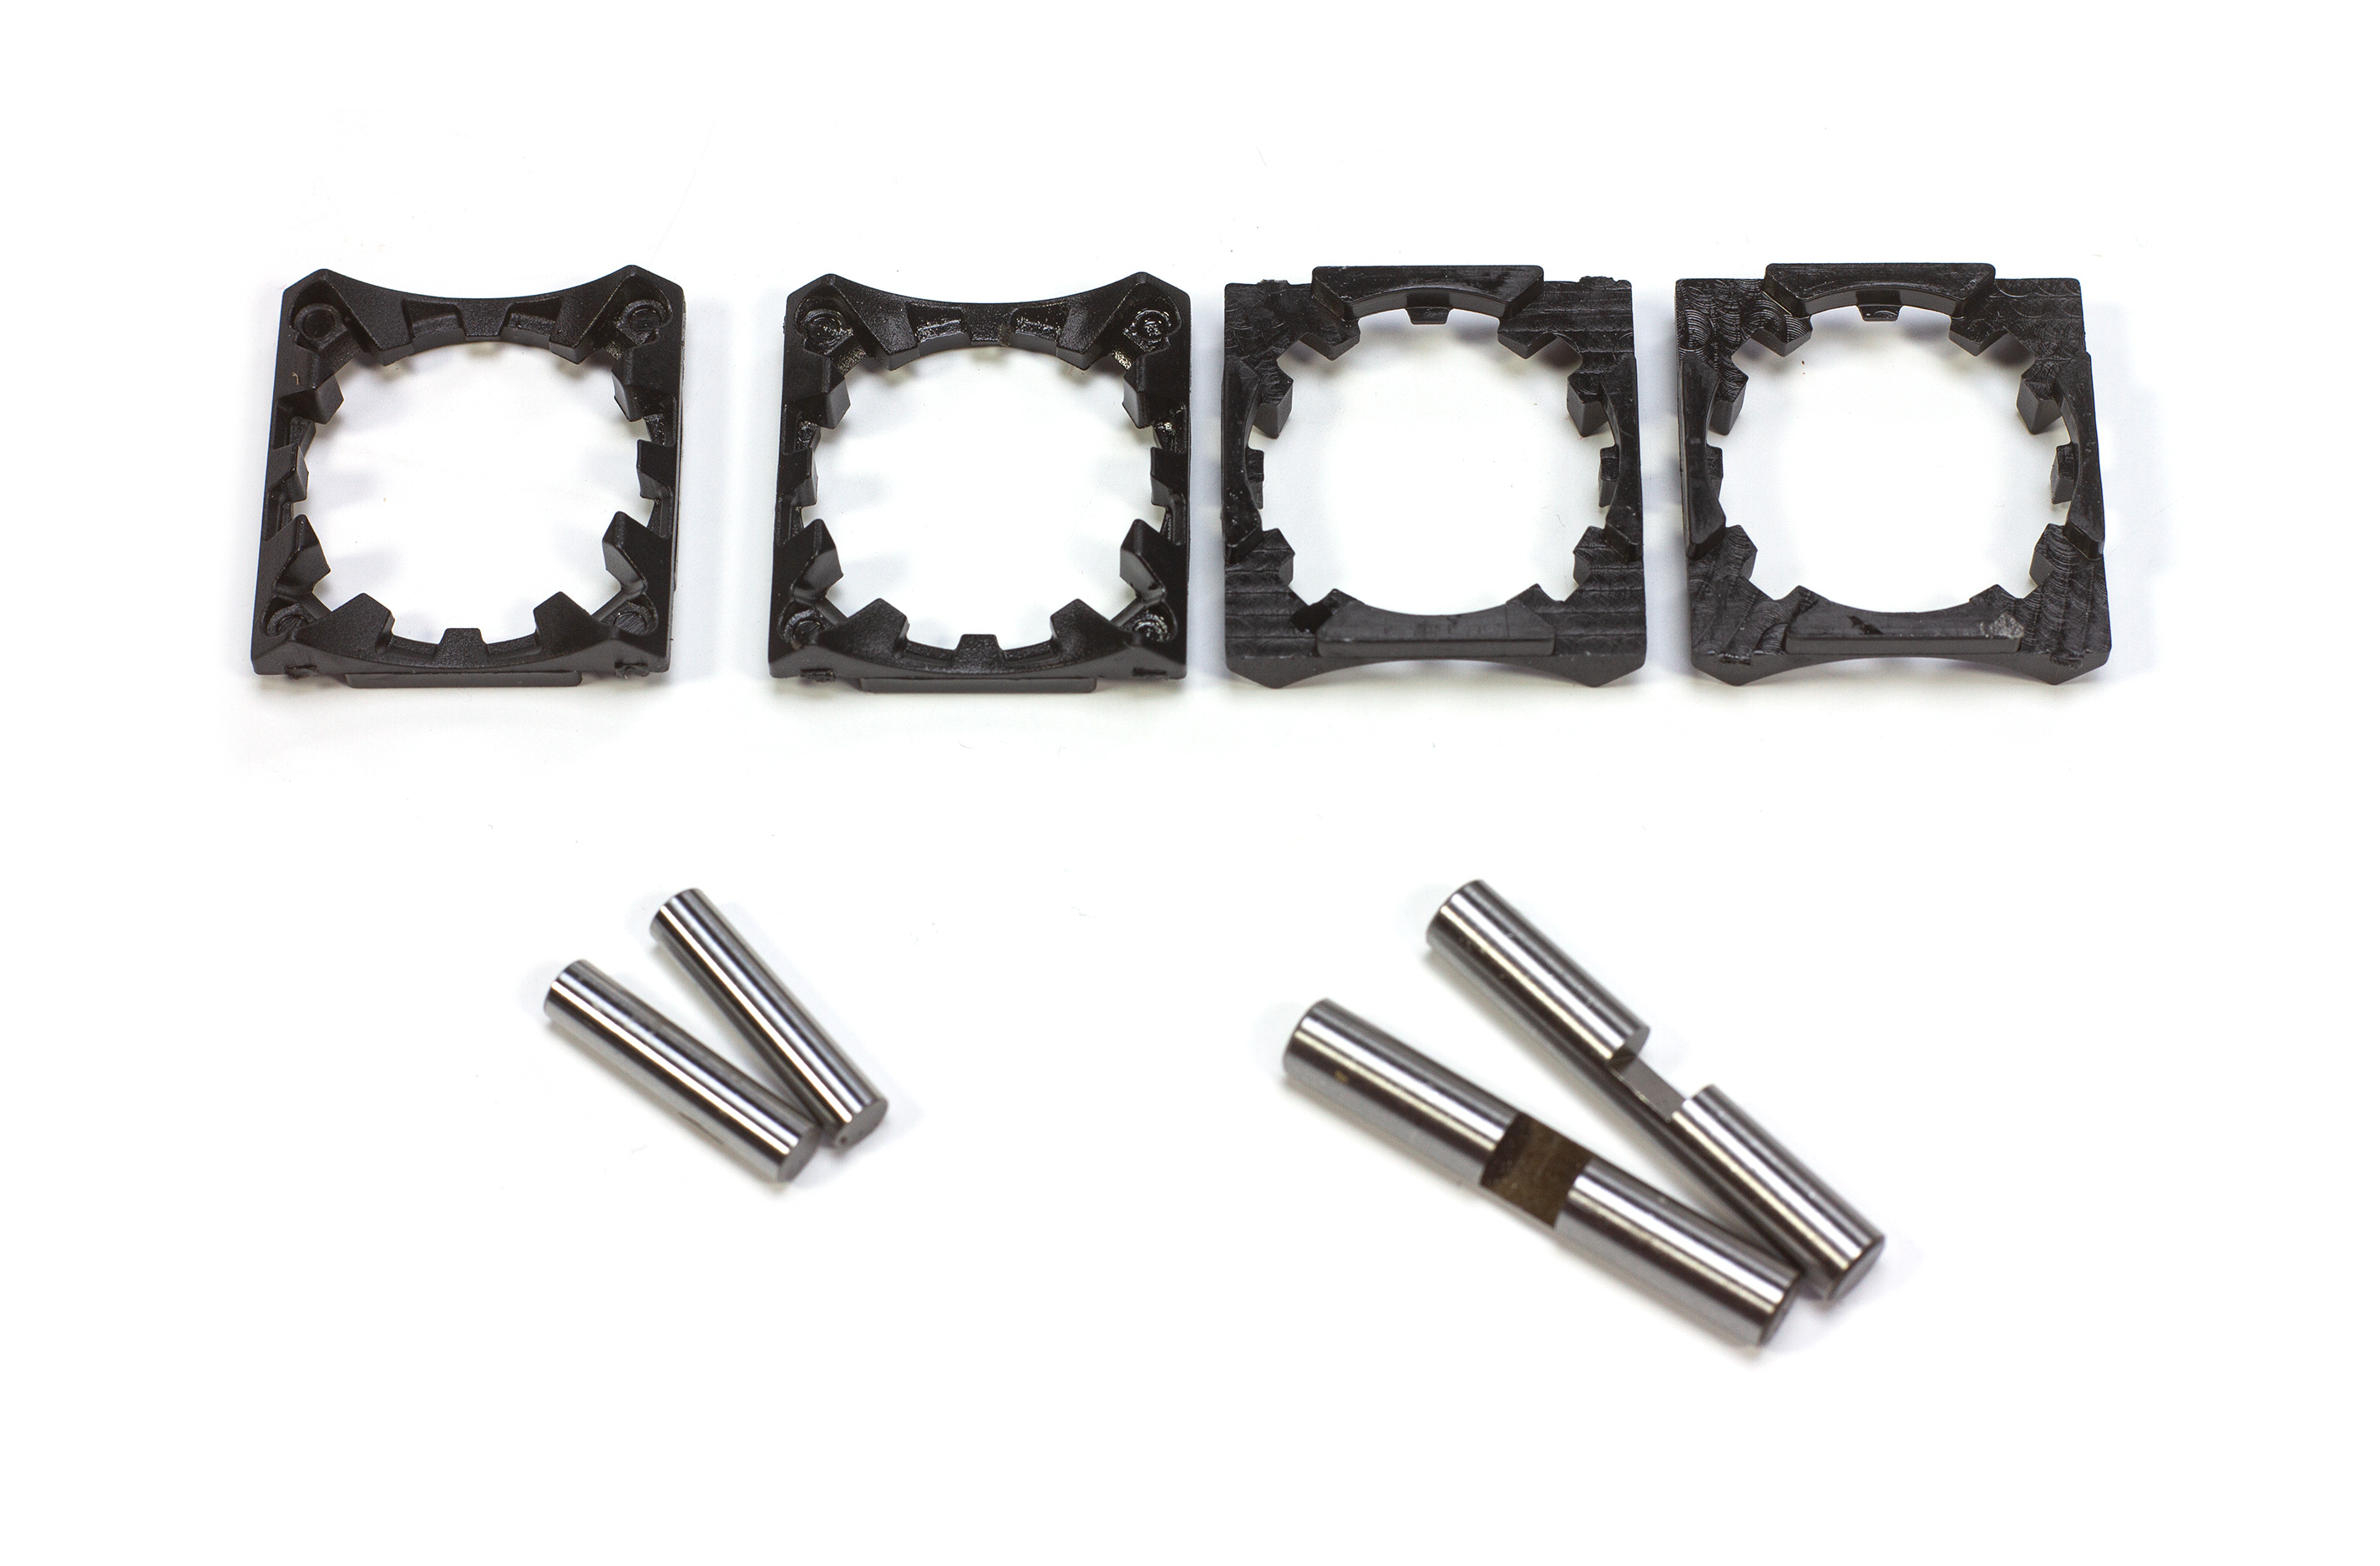 301036/5 Carson Bevel gear mounting set for Wild GP Attack